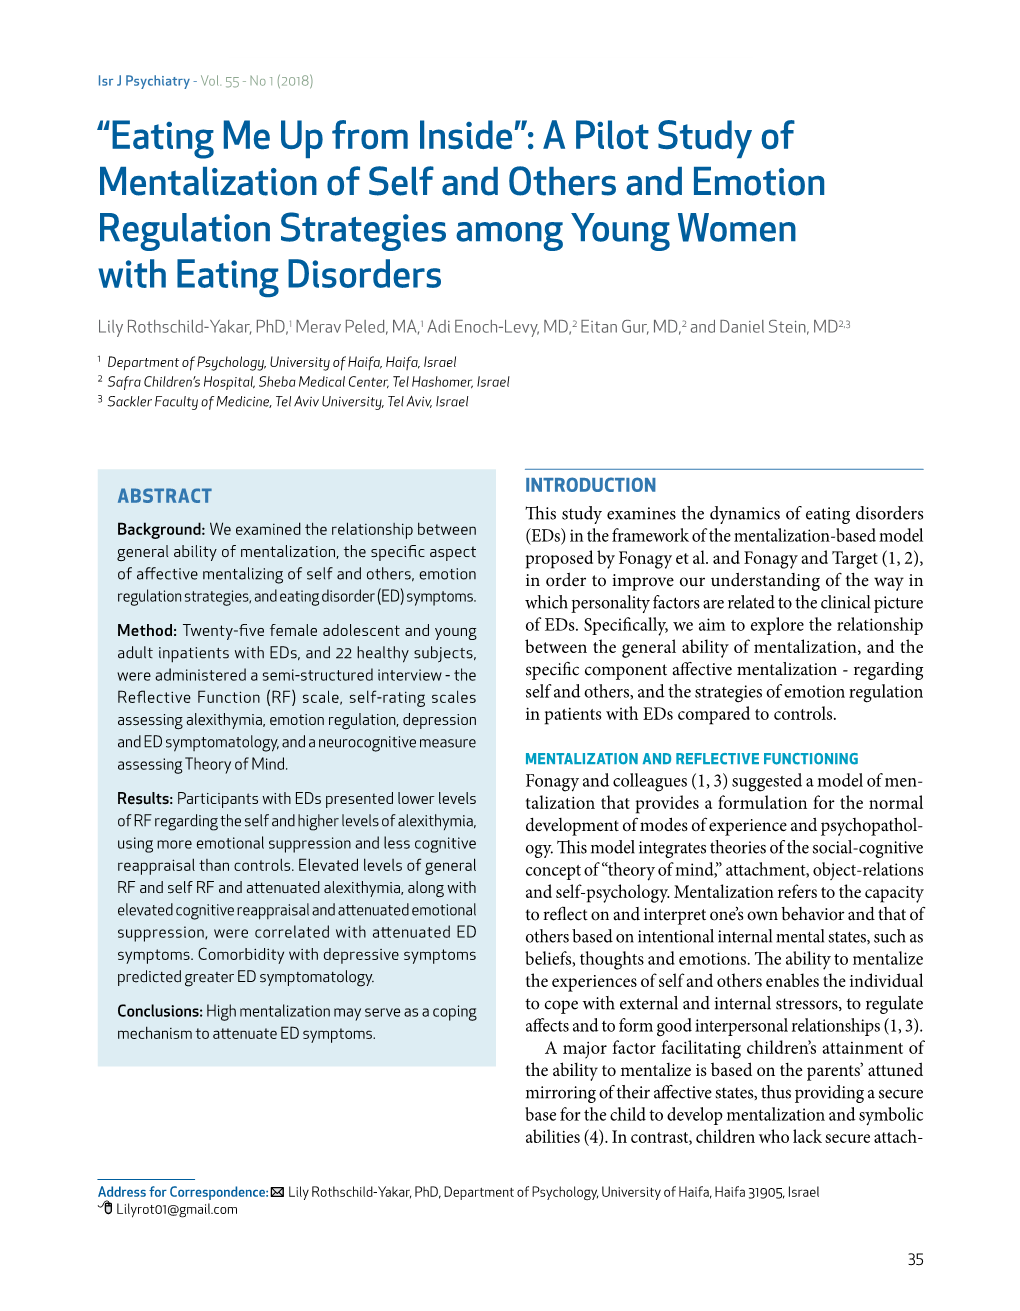 “Eating Me up from Inside”: a Pilot Study of Mentalization of Self and Others and Emotion Regulation Strategies Among Young Women with Eating Disorders